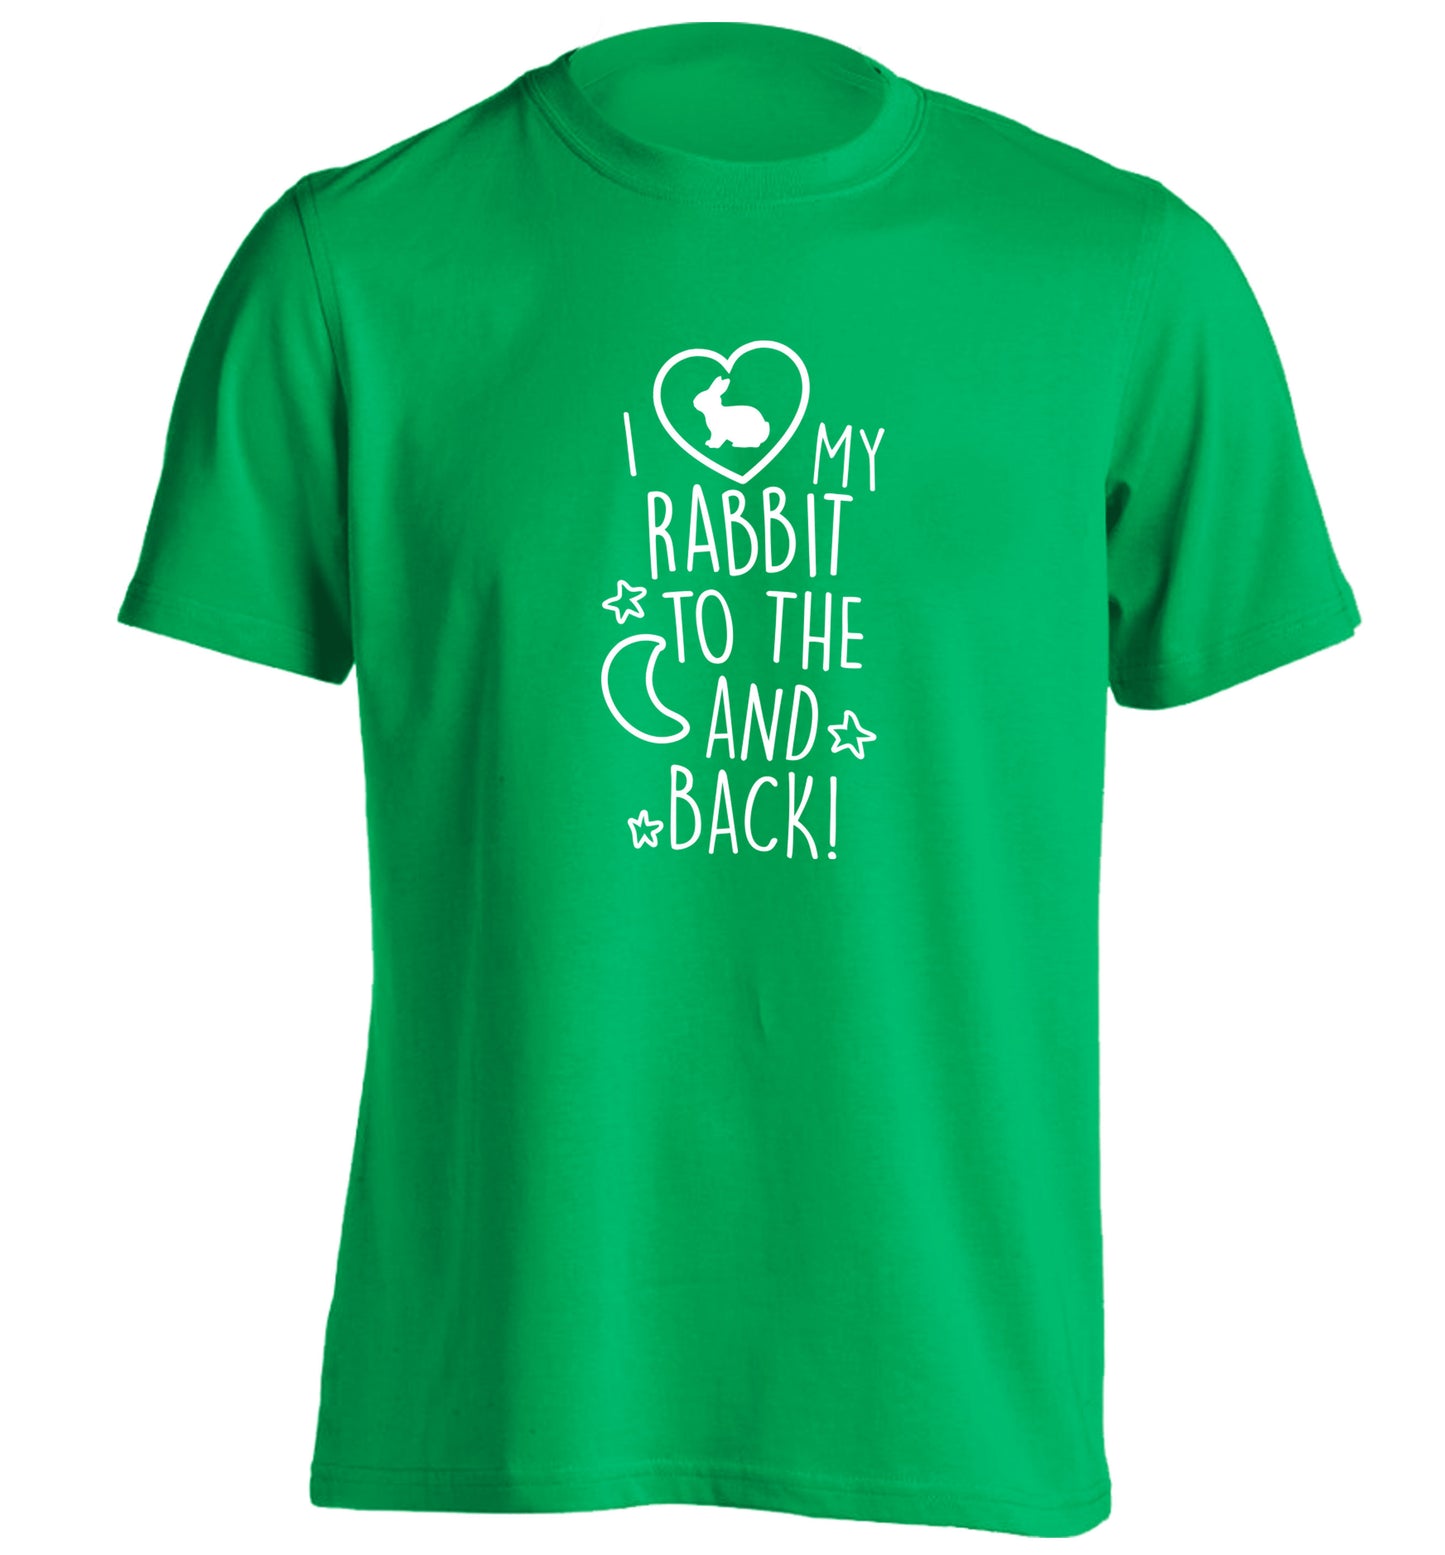 I love my rabbit to the moon and back adults unisex green Tshirt 2XL